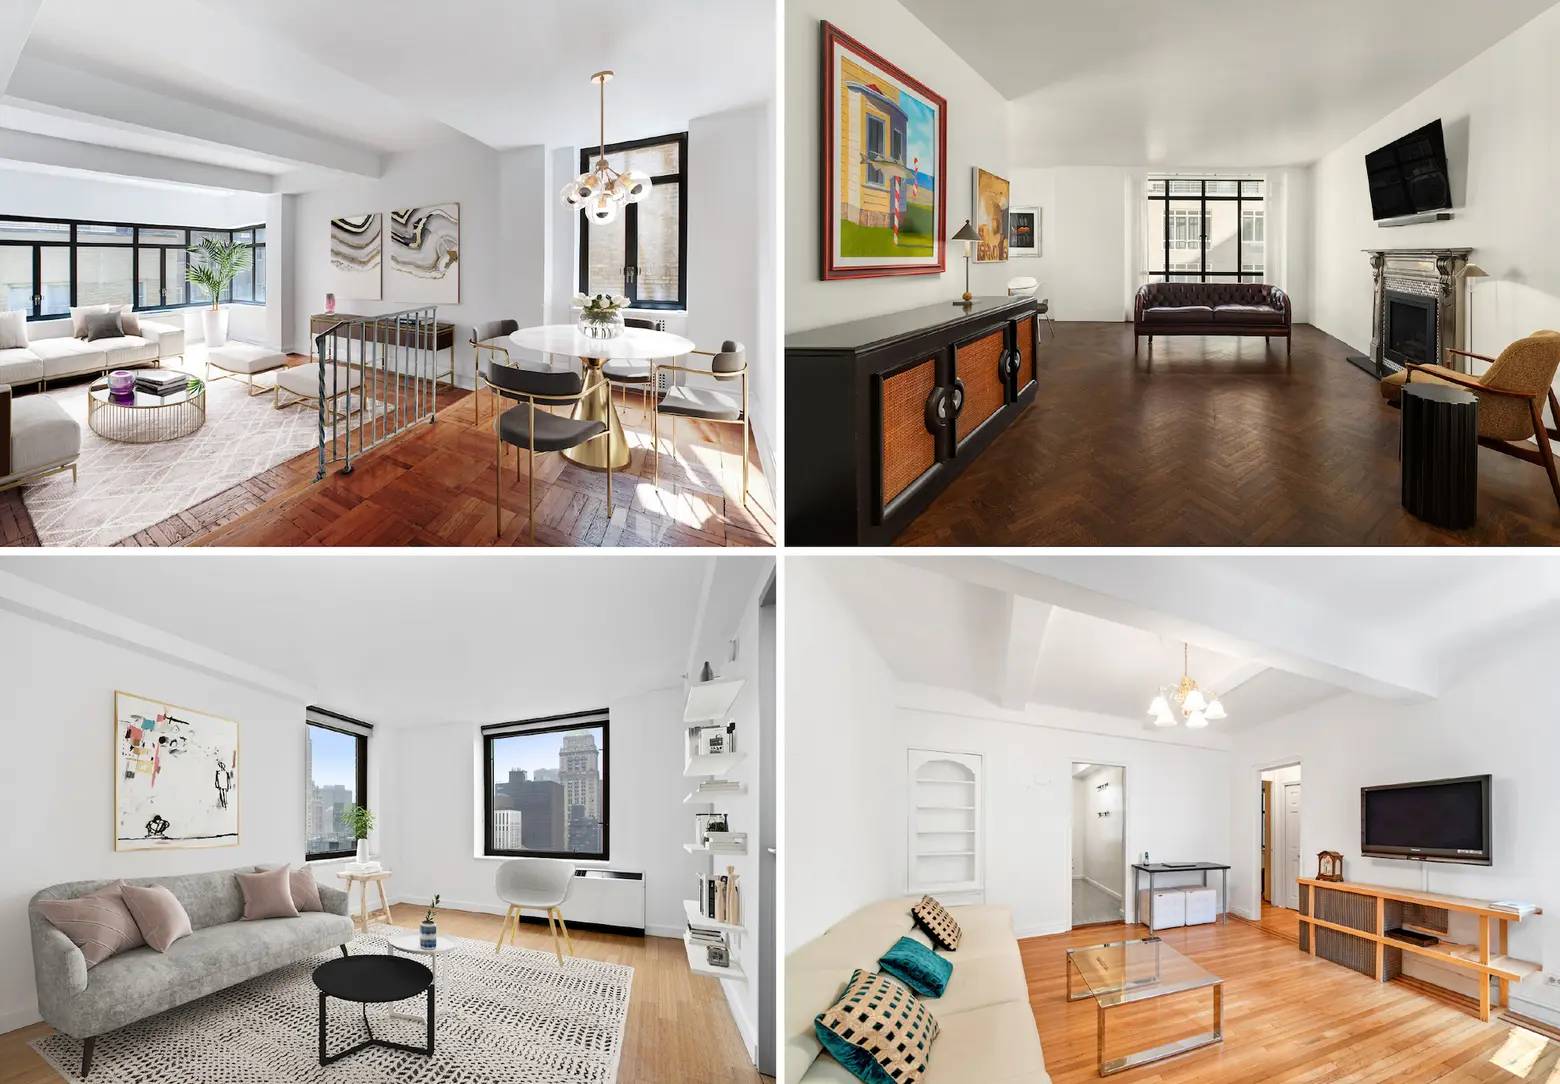 Feel festive all year round: The best apartments for sale near Rockefeller Center